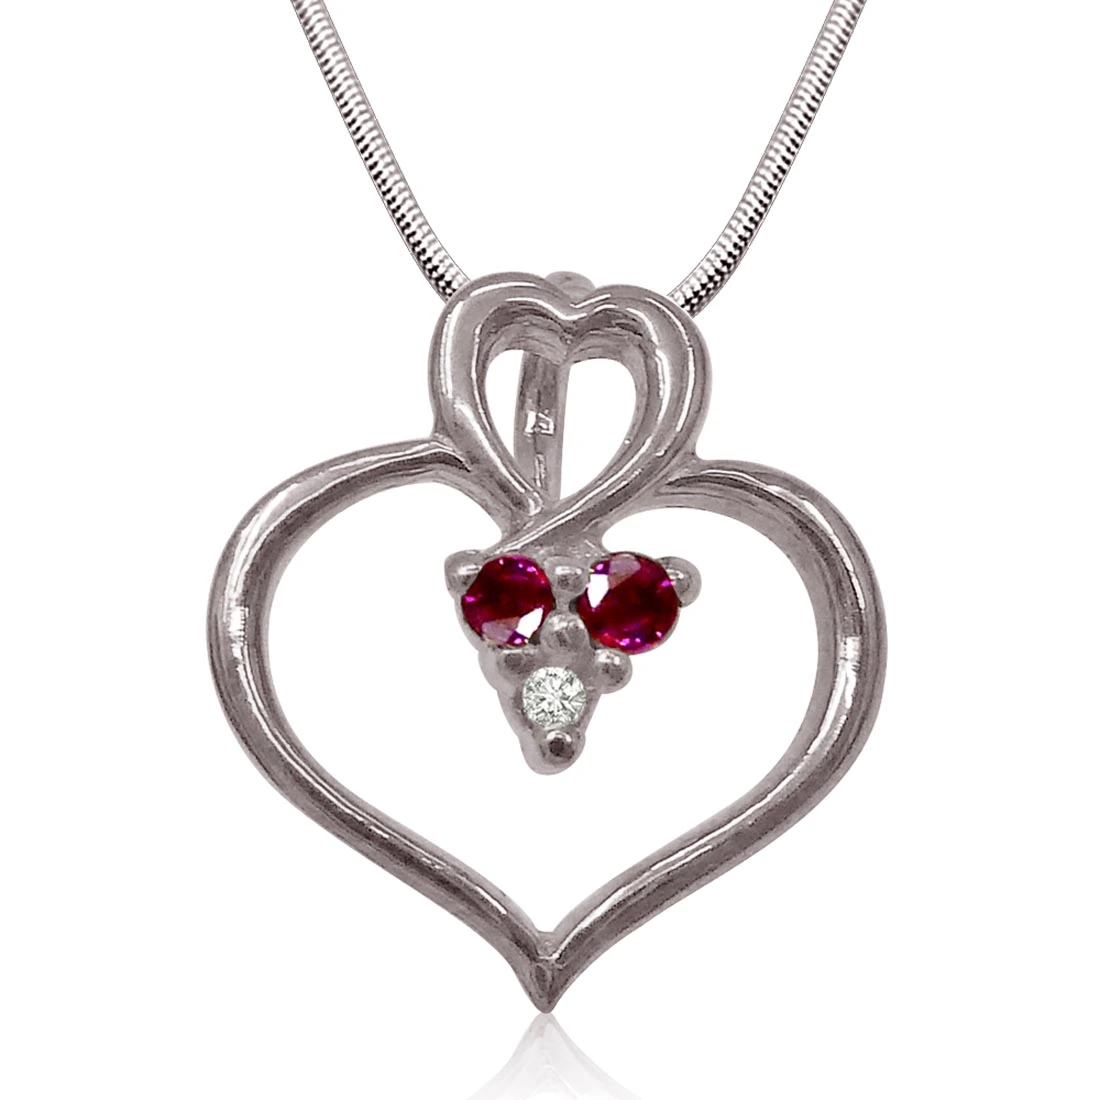 Rosy Heart - Real Diamond, Red Ruby & Sterling Silver Pendant with 18 IN Chain (SDP184)